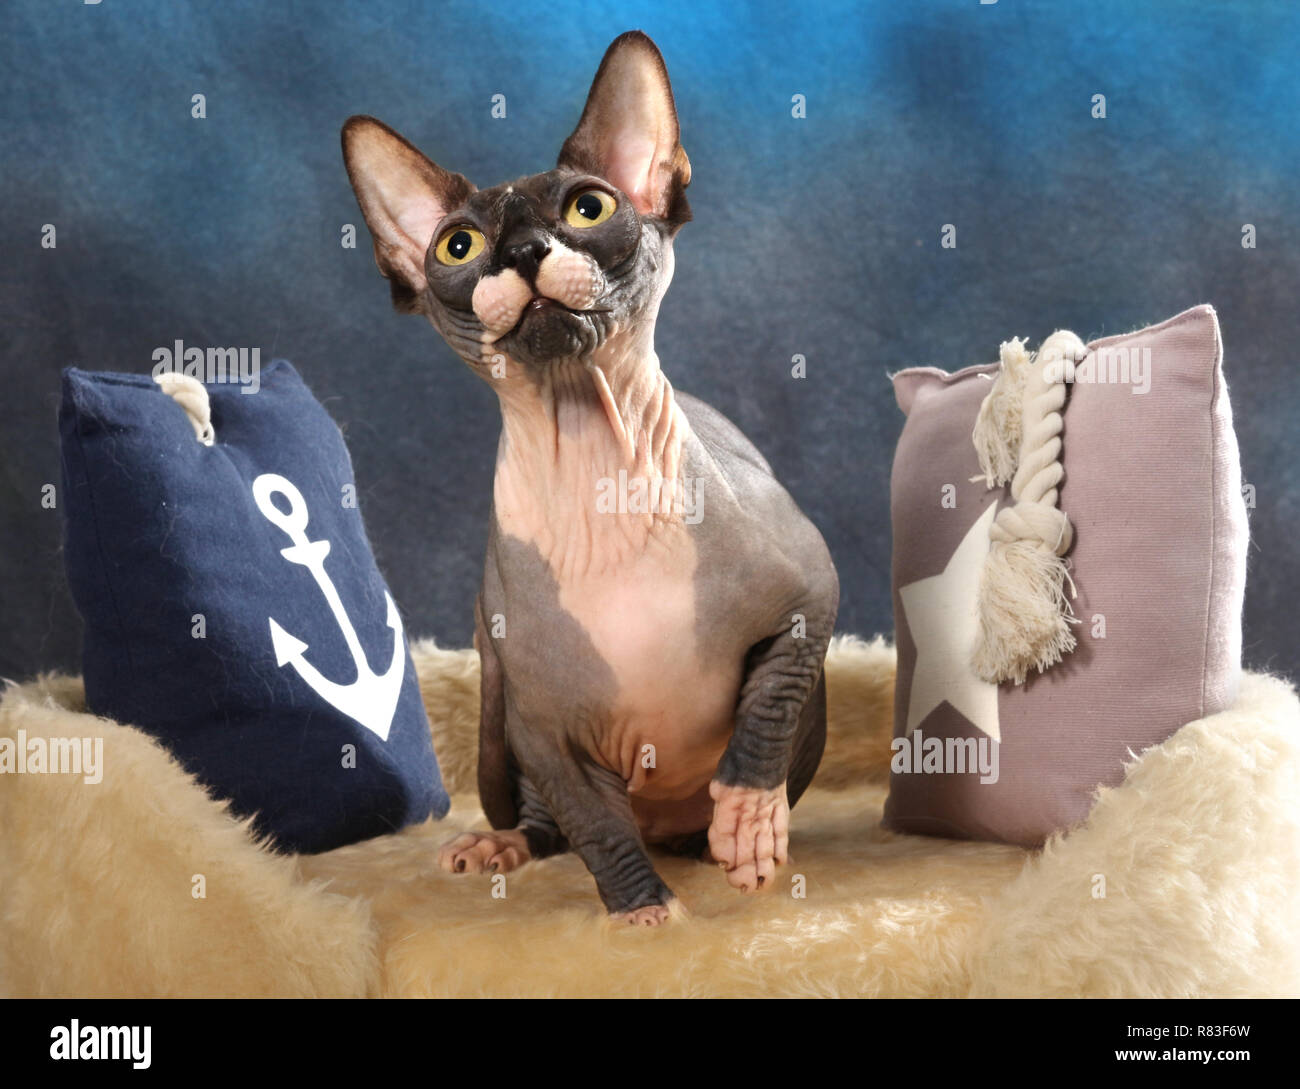 sphinx cat, bambino, a cat with short legs, sitting on a pillow Stock Photo